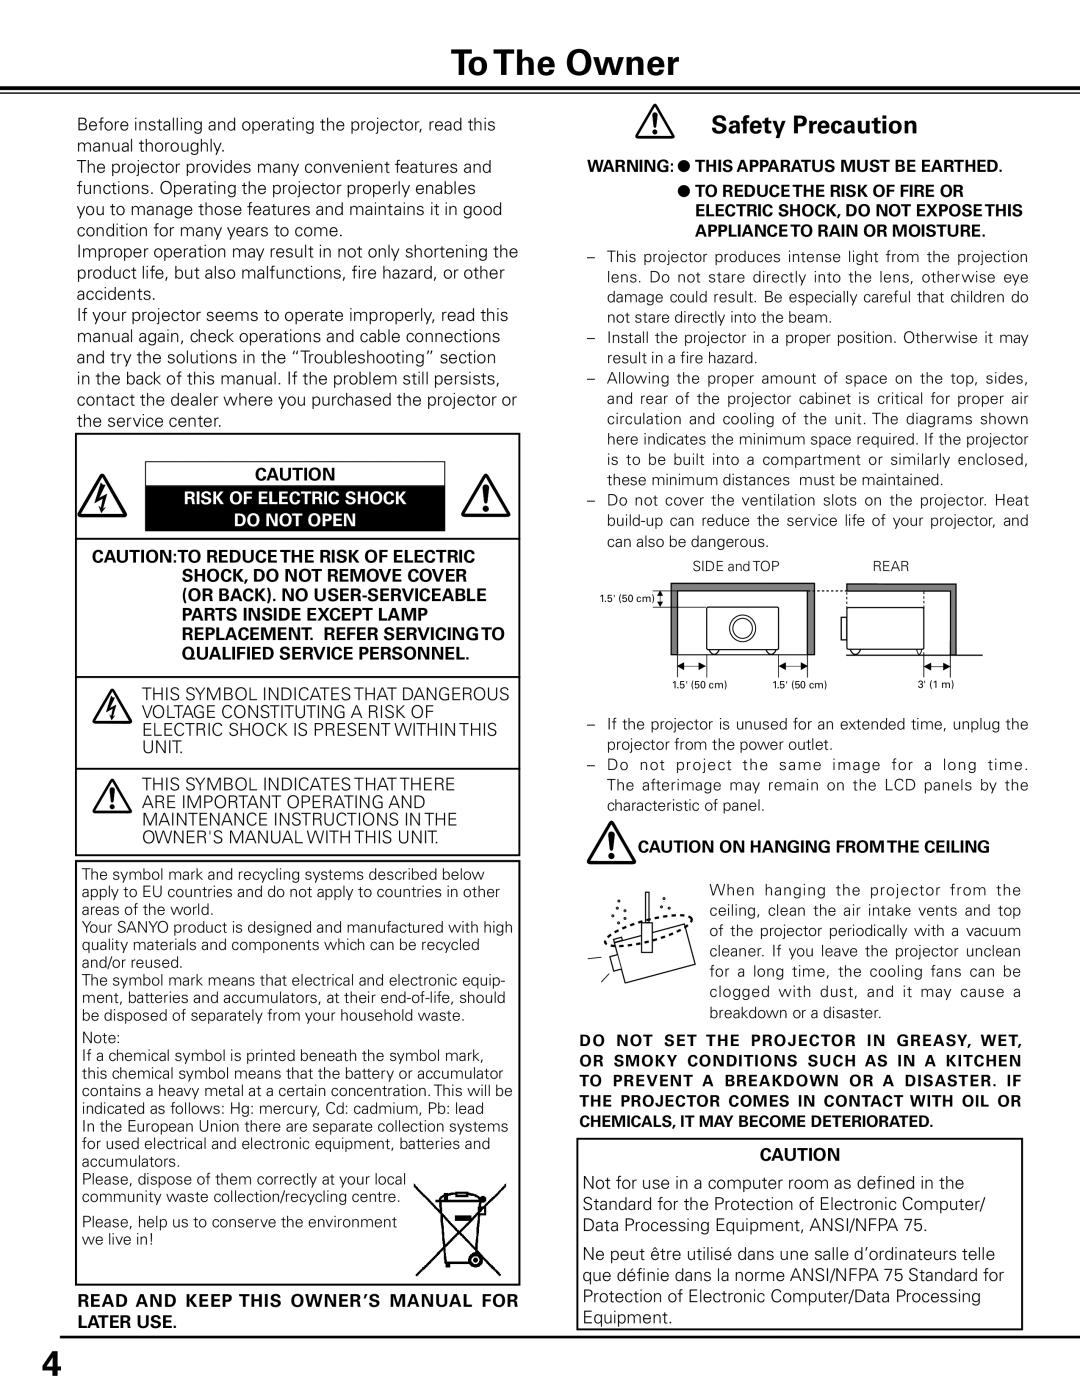 Sanyo PLC-XP200L owner manual To The Owner, Safety Precaution, Risk Of Electric Shock Do Not Open 